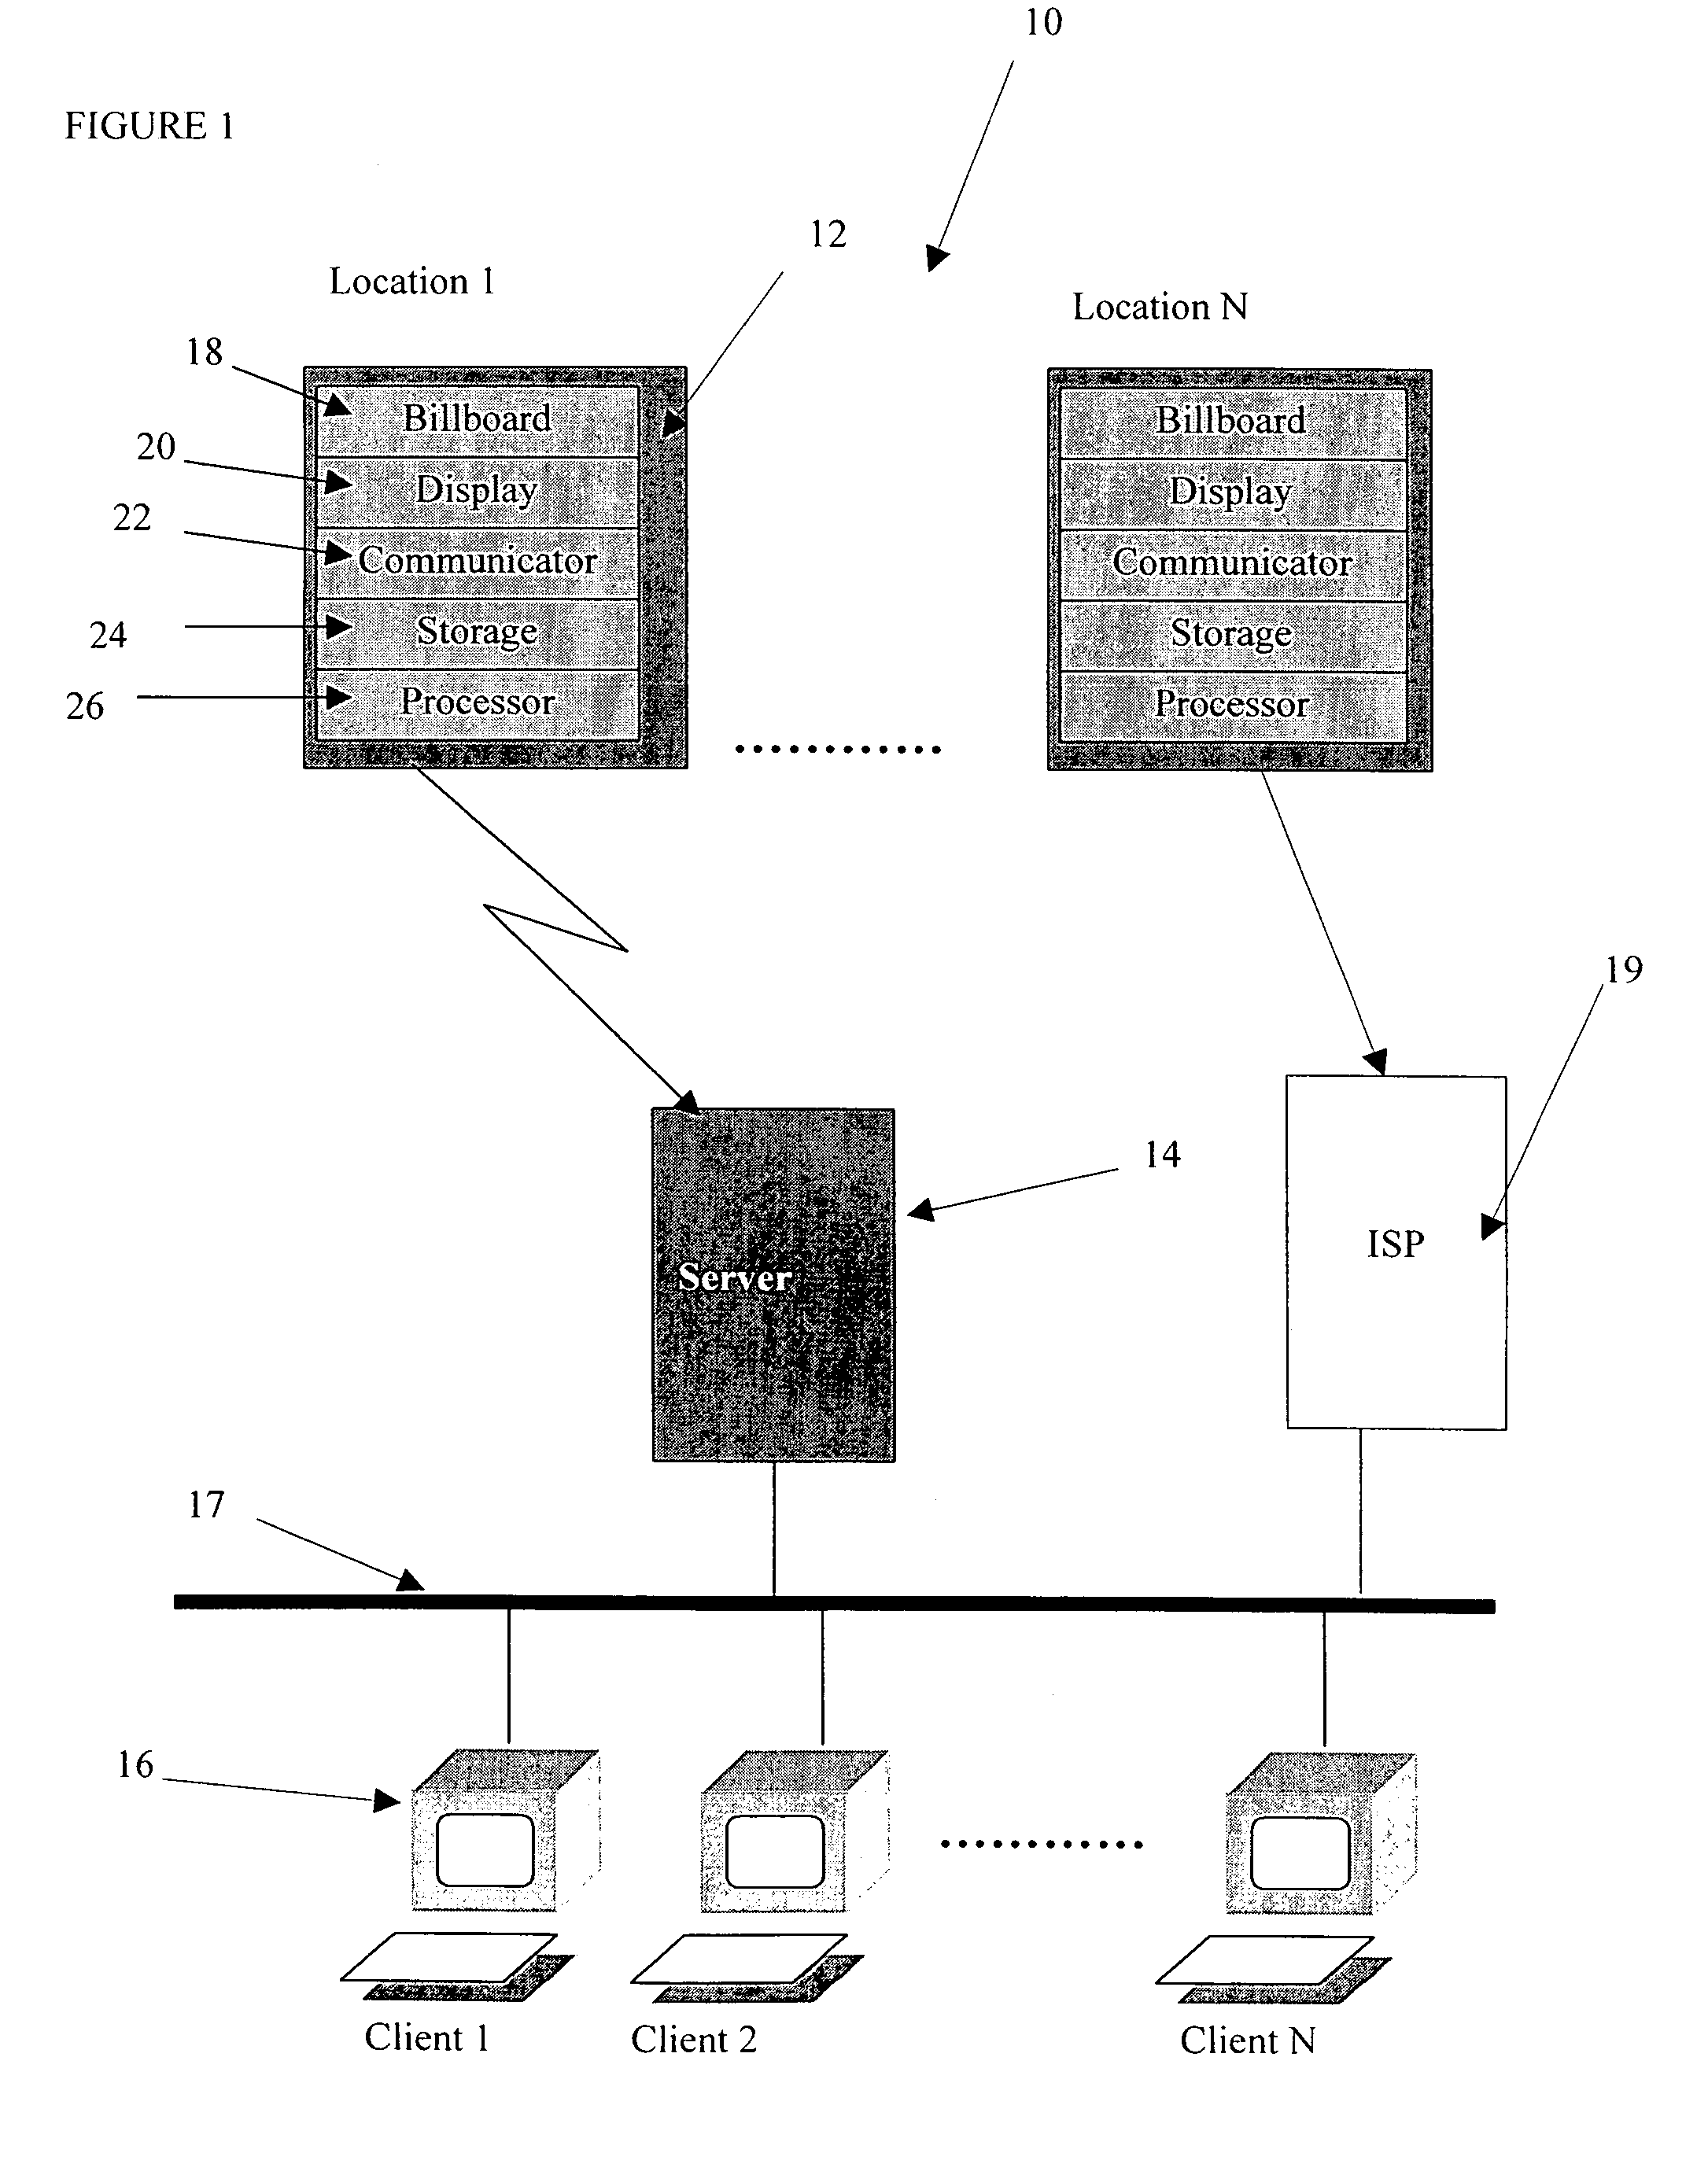 Method and system for dynamic display of marketing campaigns on display locations via a network